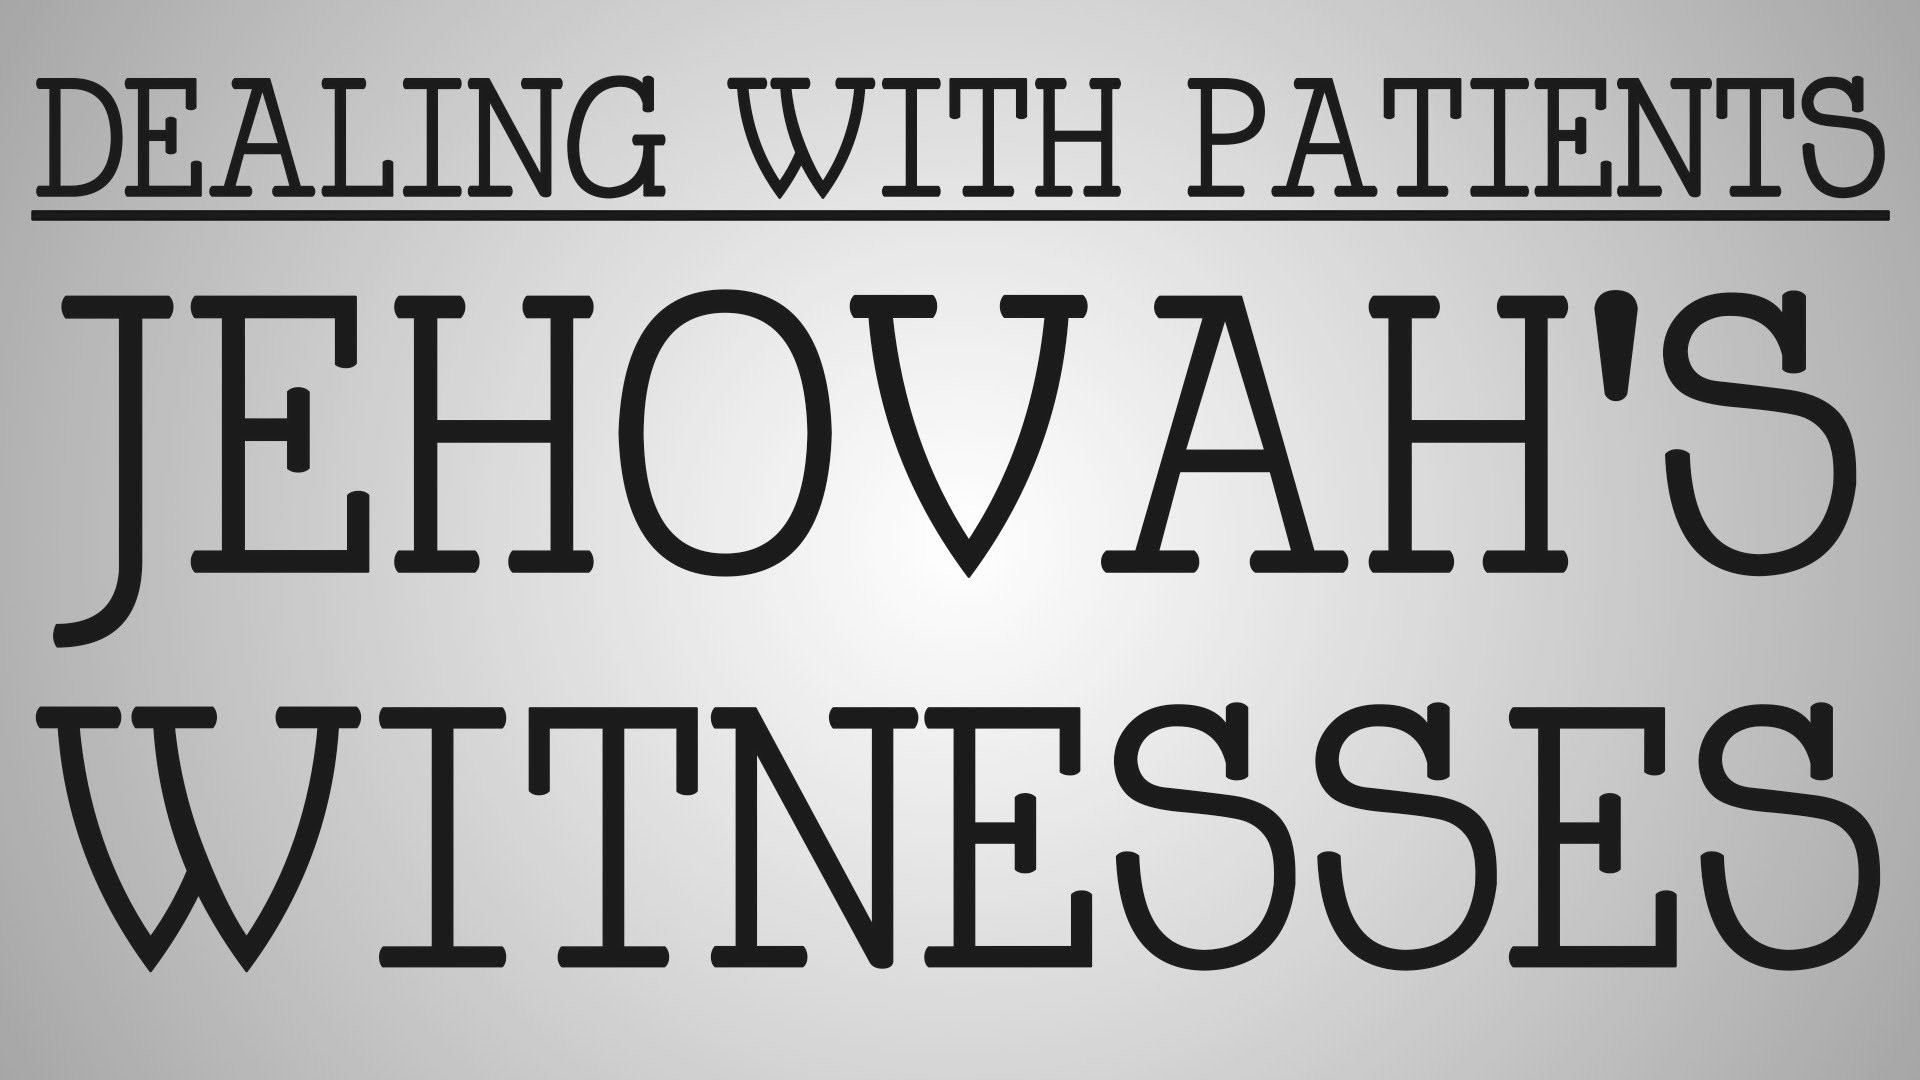 Dealing With Patients Jehovahs Witnesses